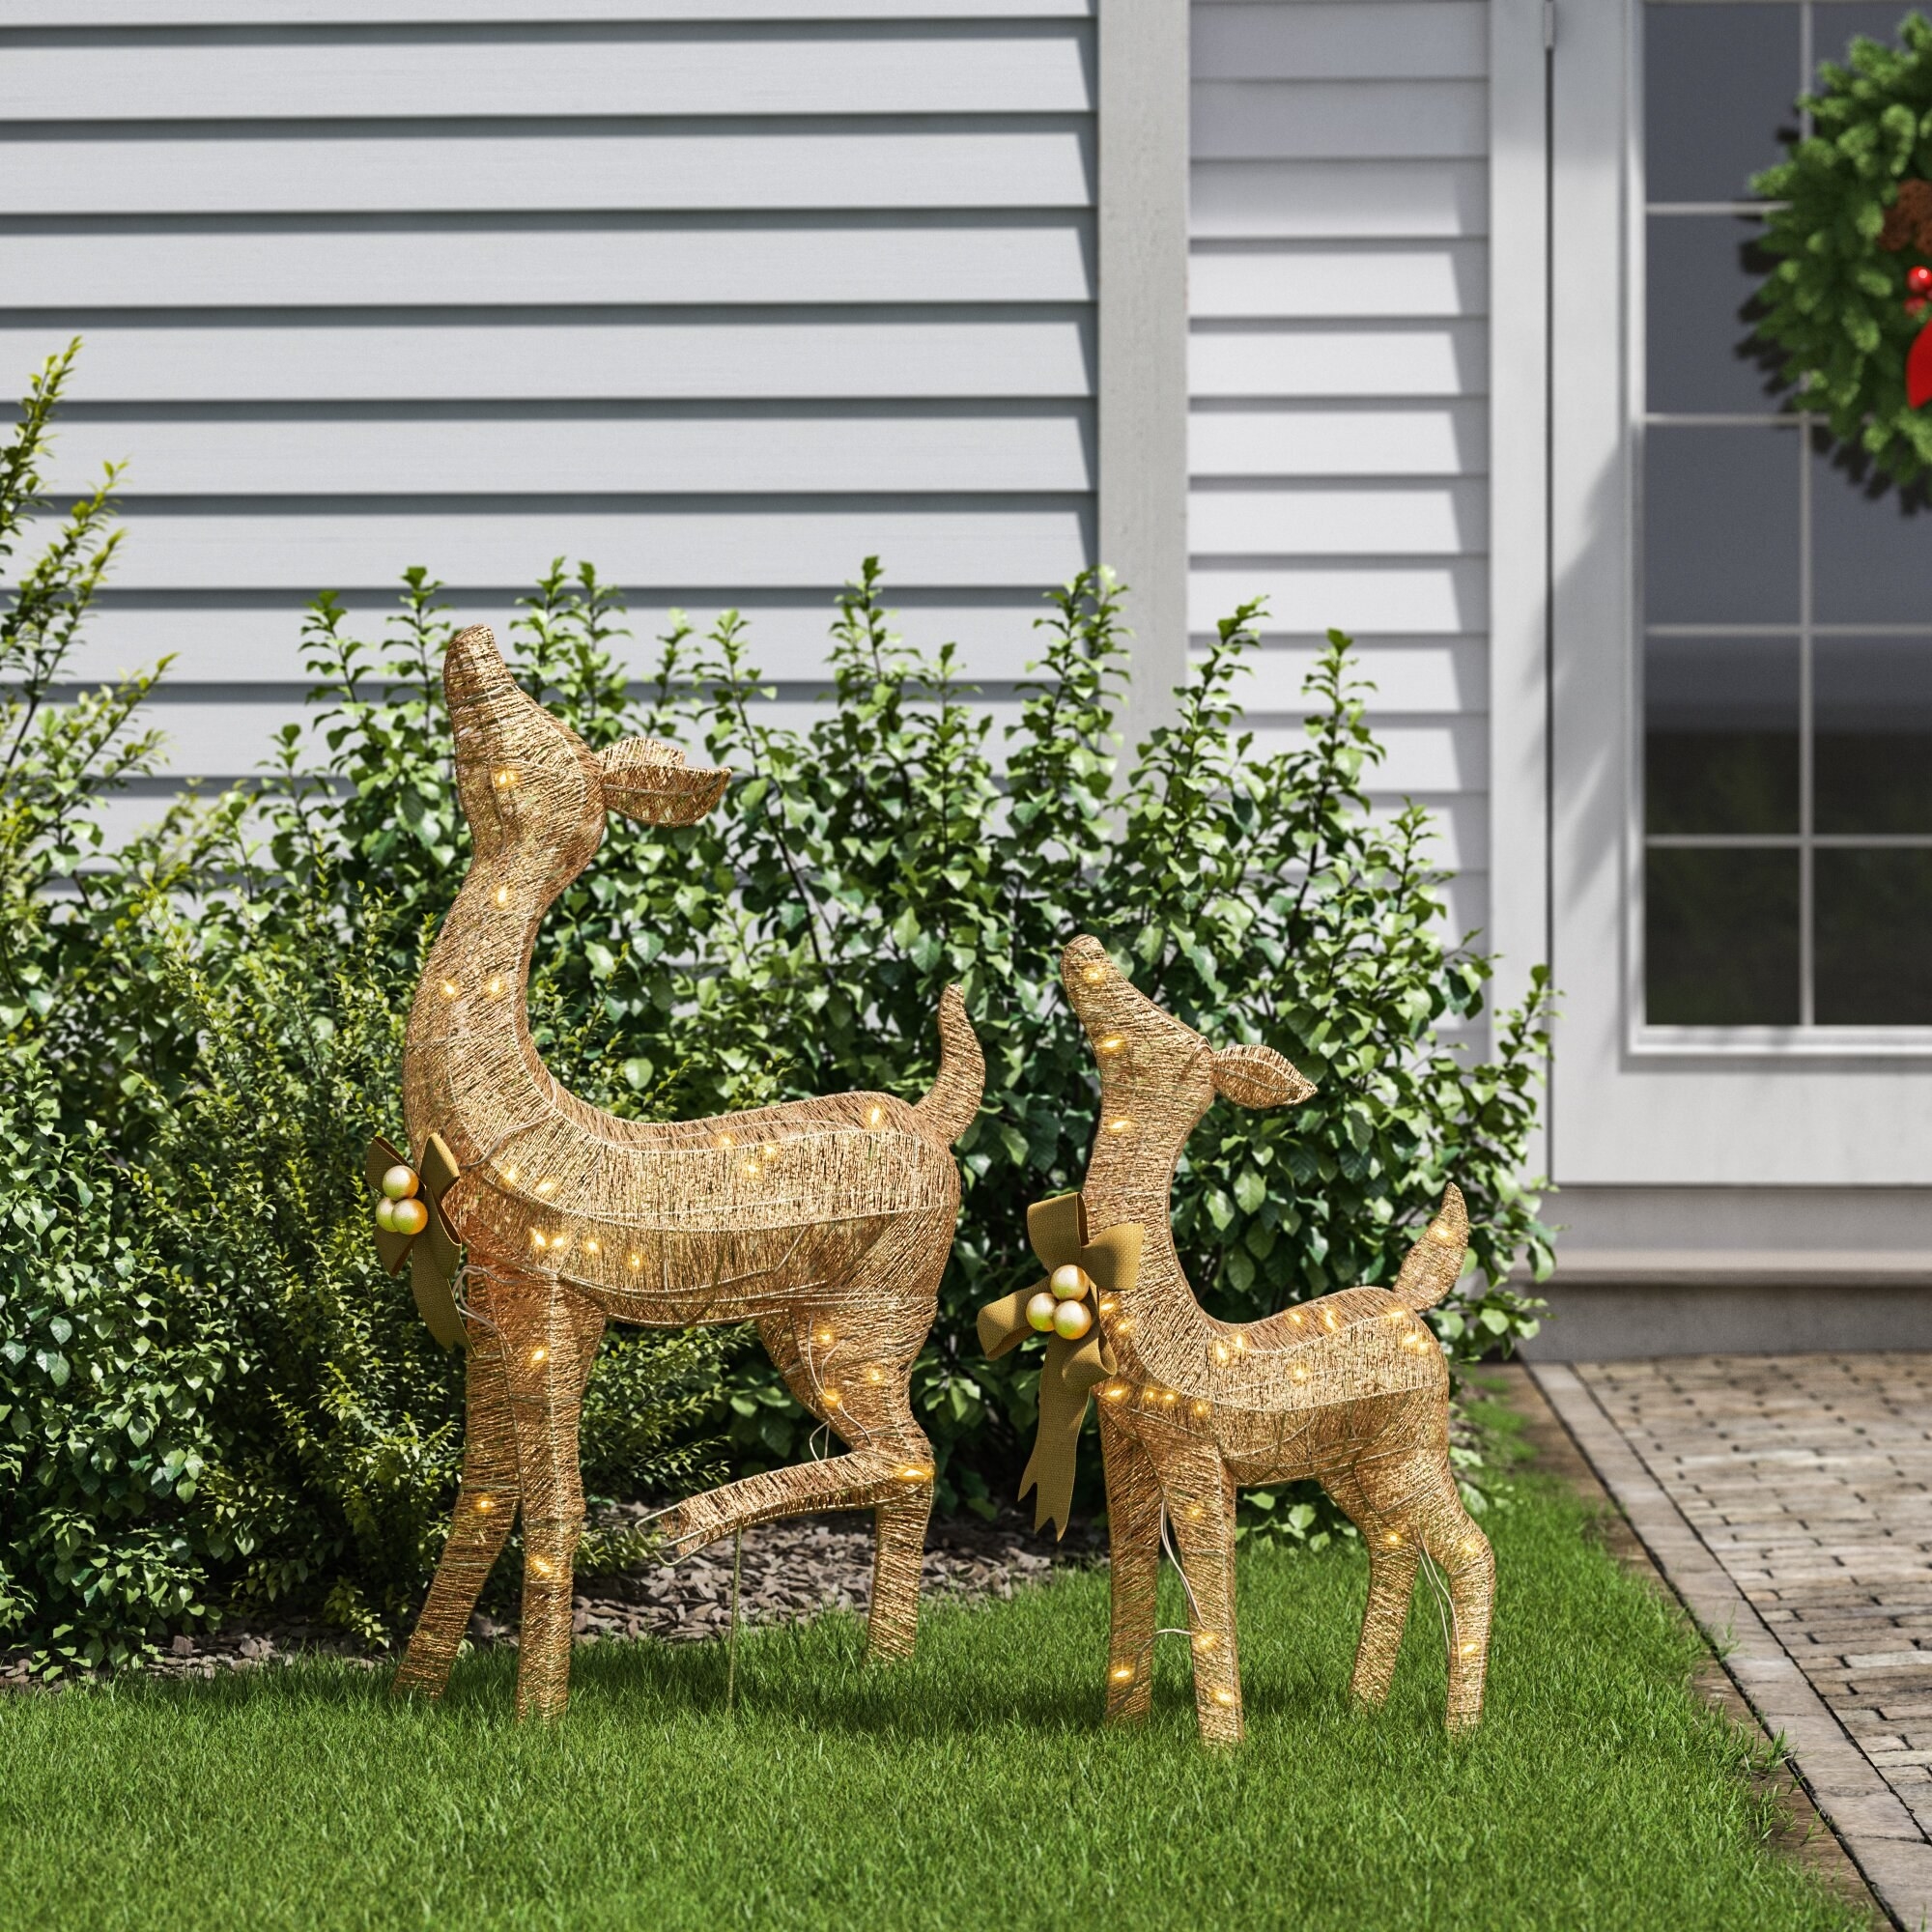 the lawn fawn and doe